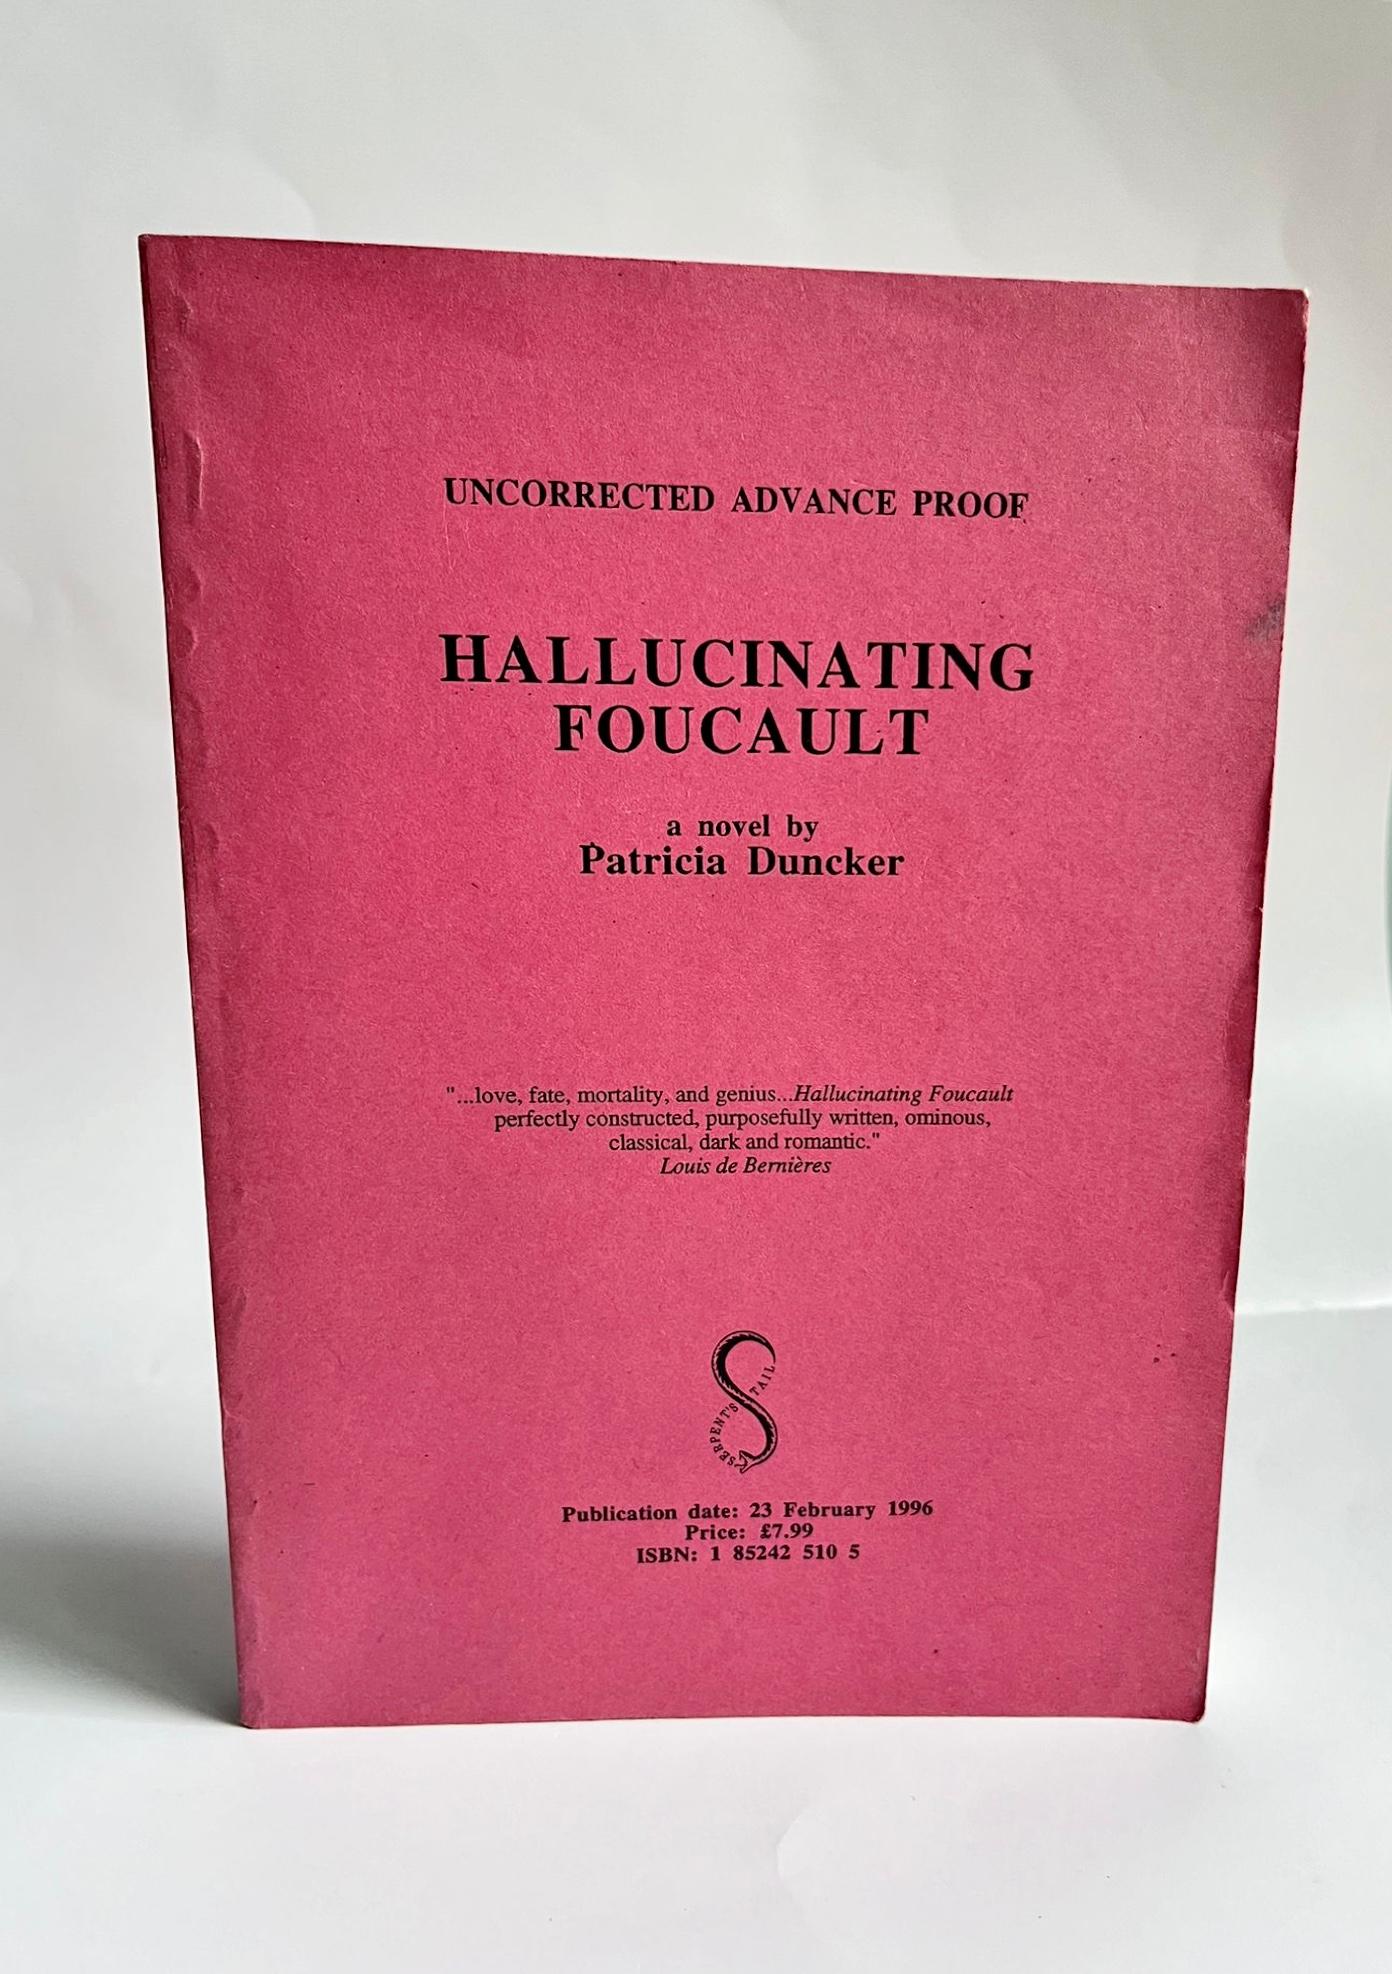 Hallucinating Foucault by Patricia Duncker Signed Proof